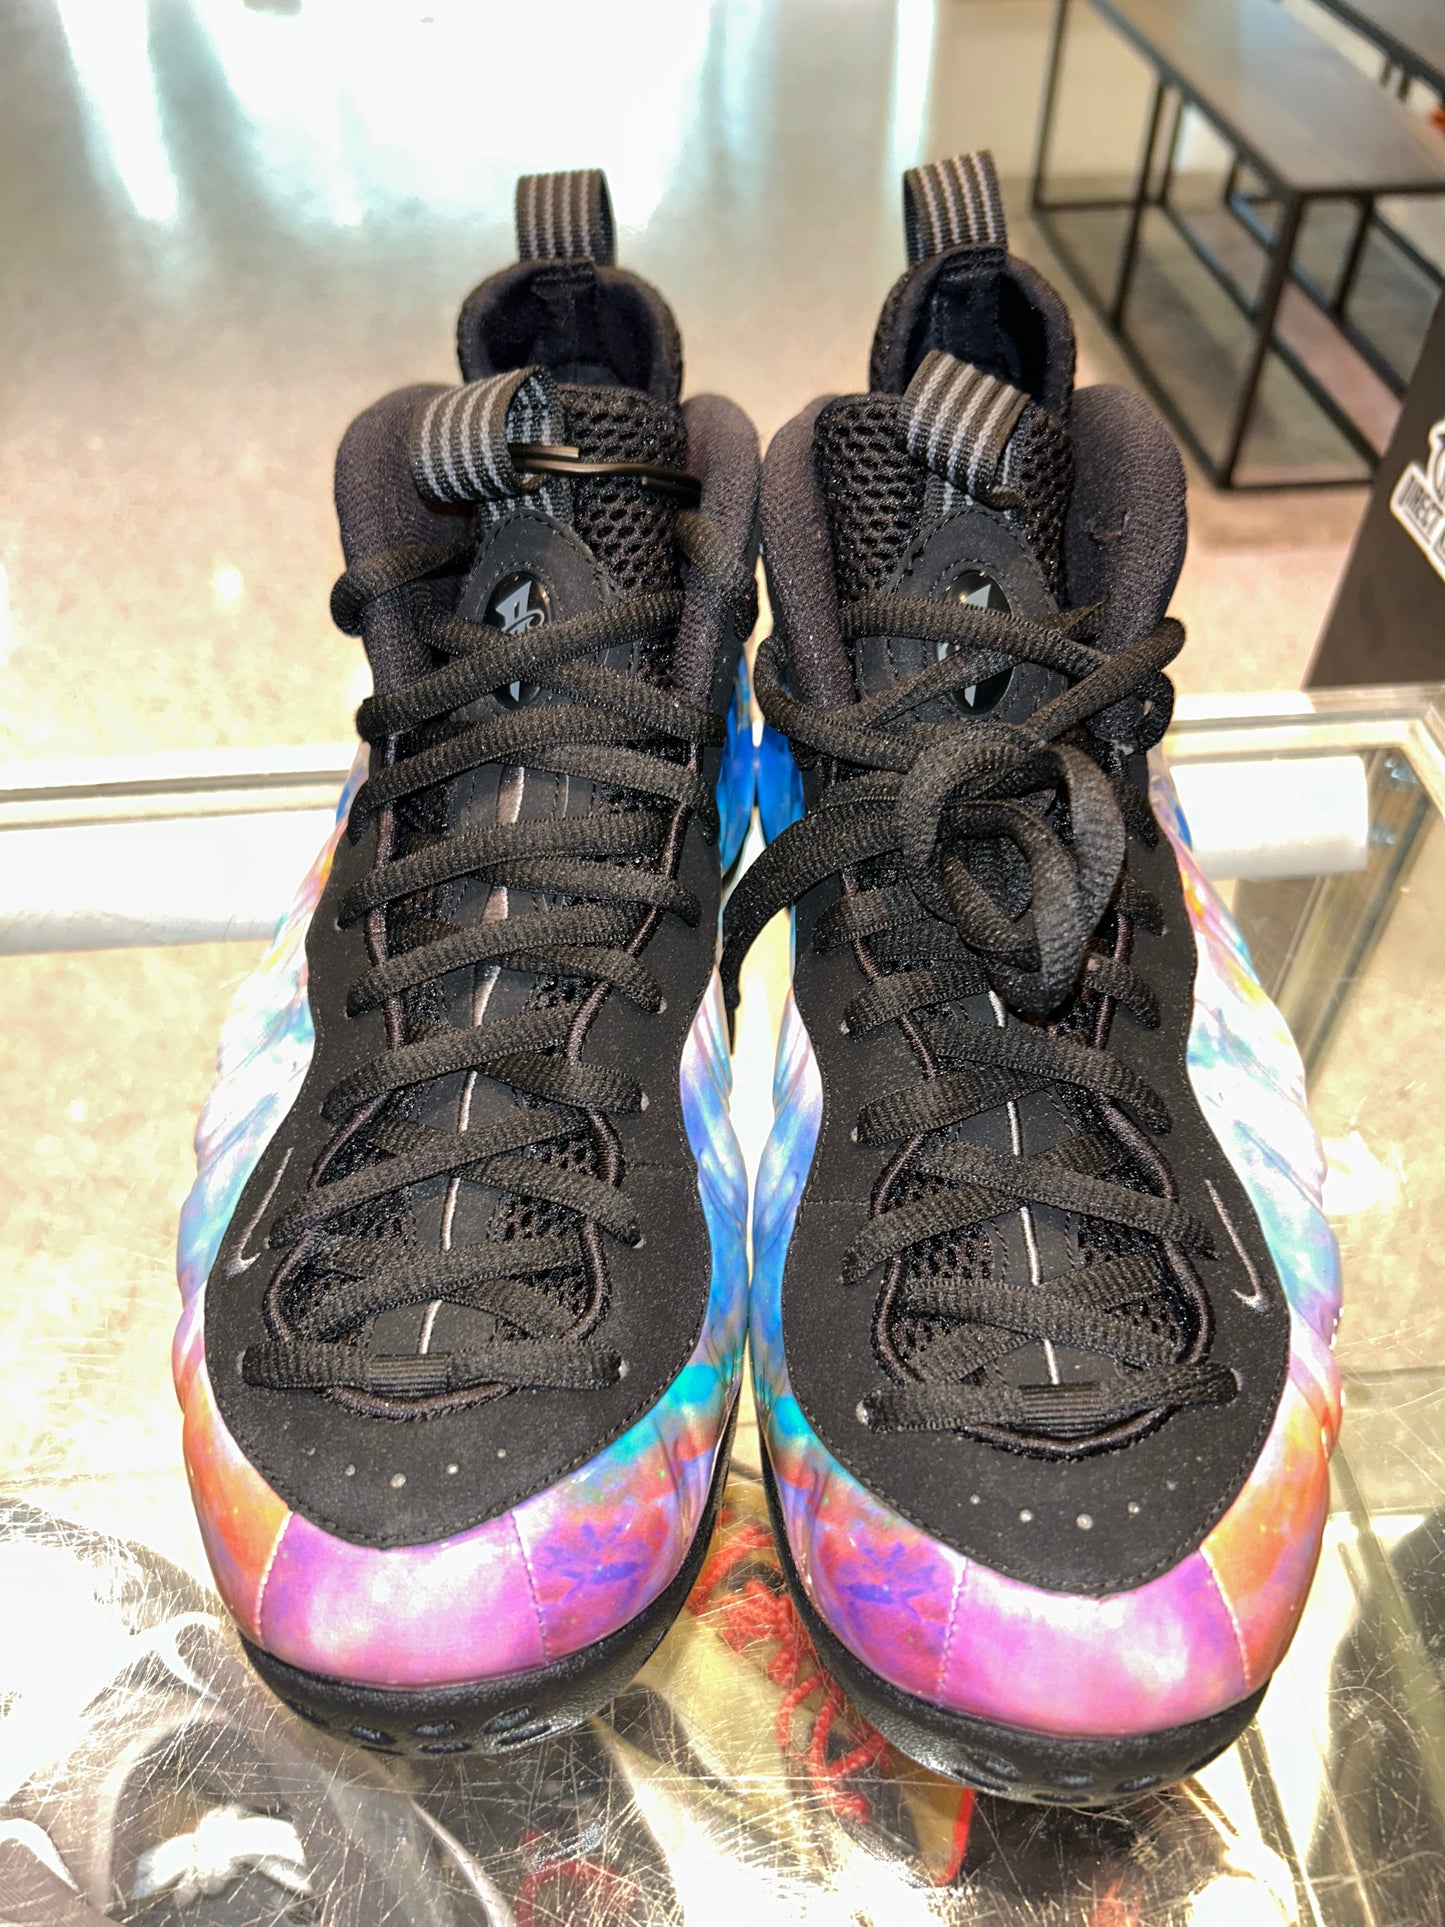 Size 11.5 Foamposite One “Big Bang” Brand New (Mall)